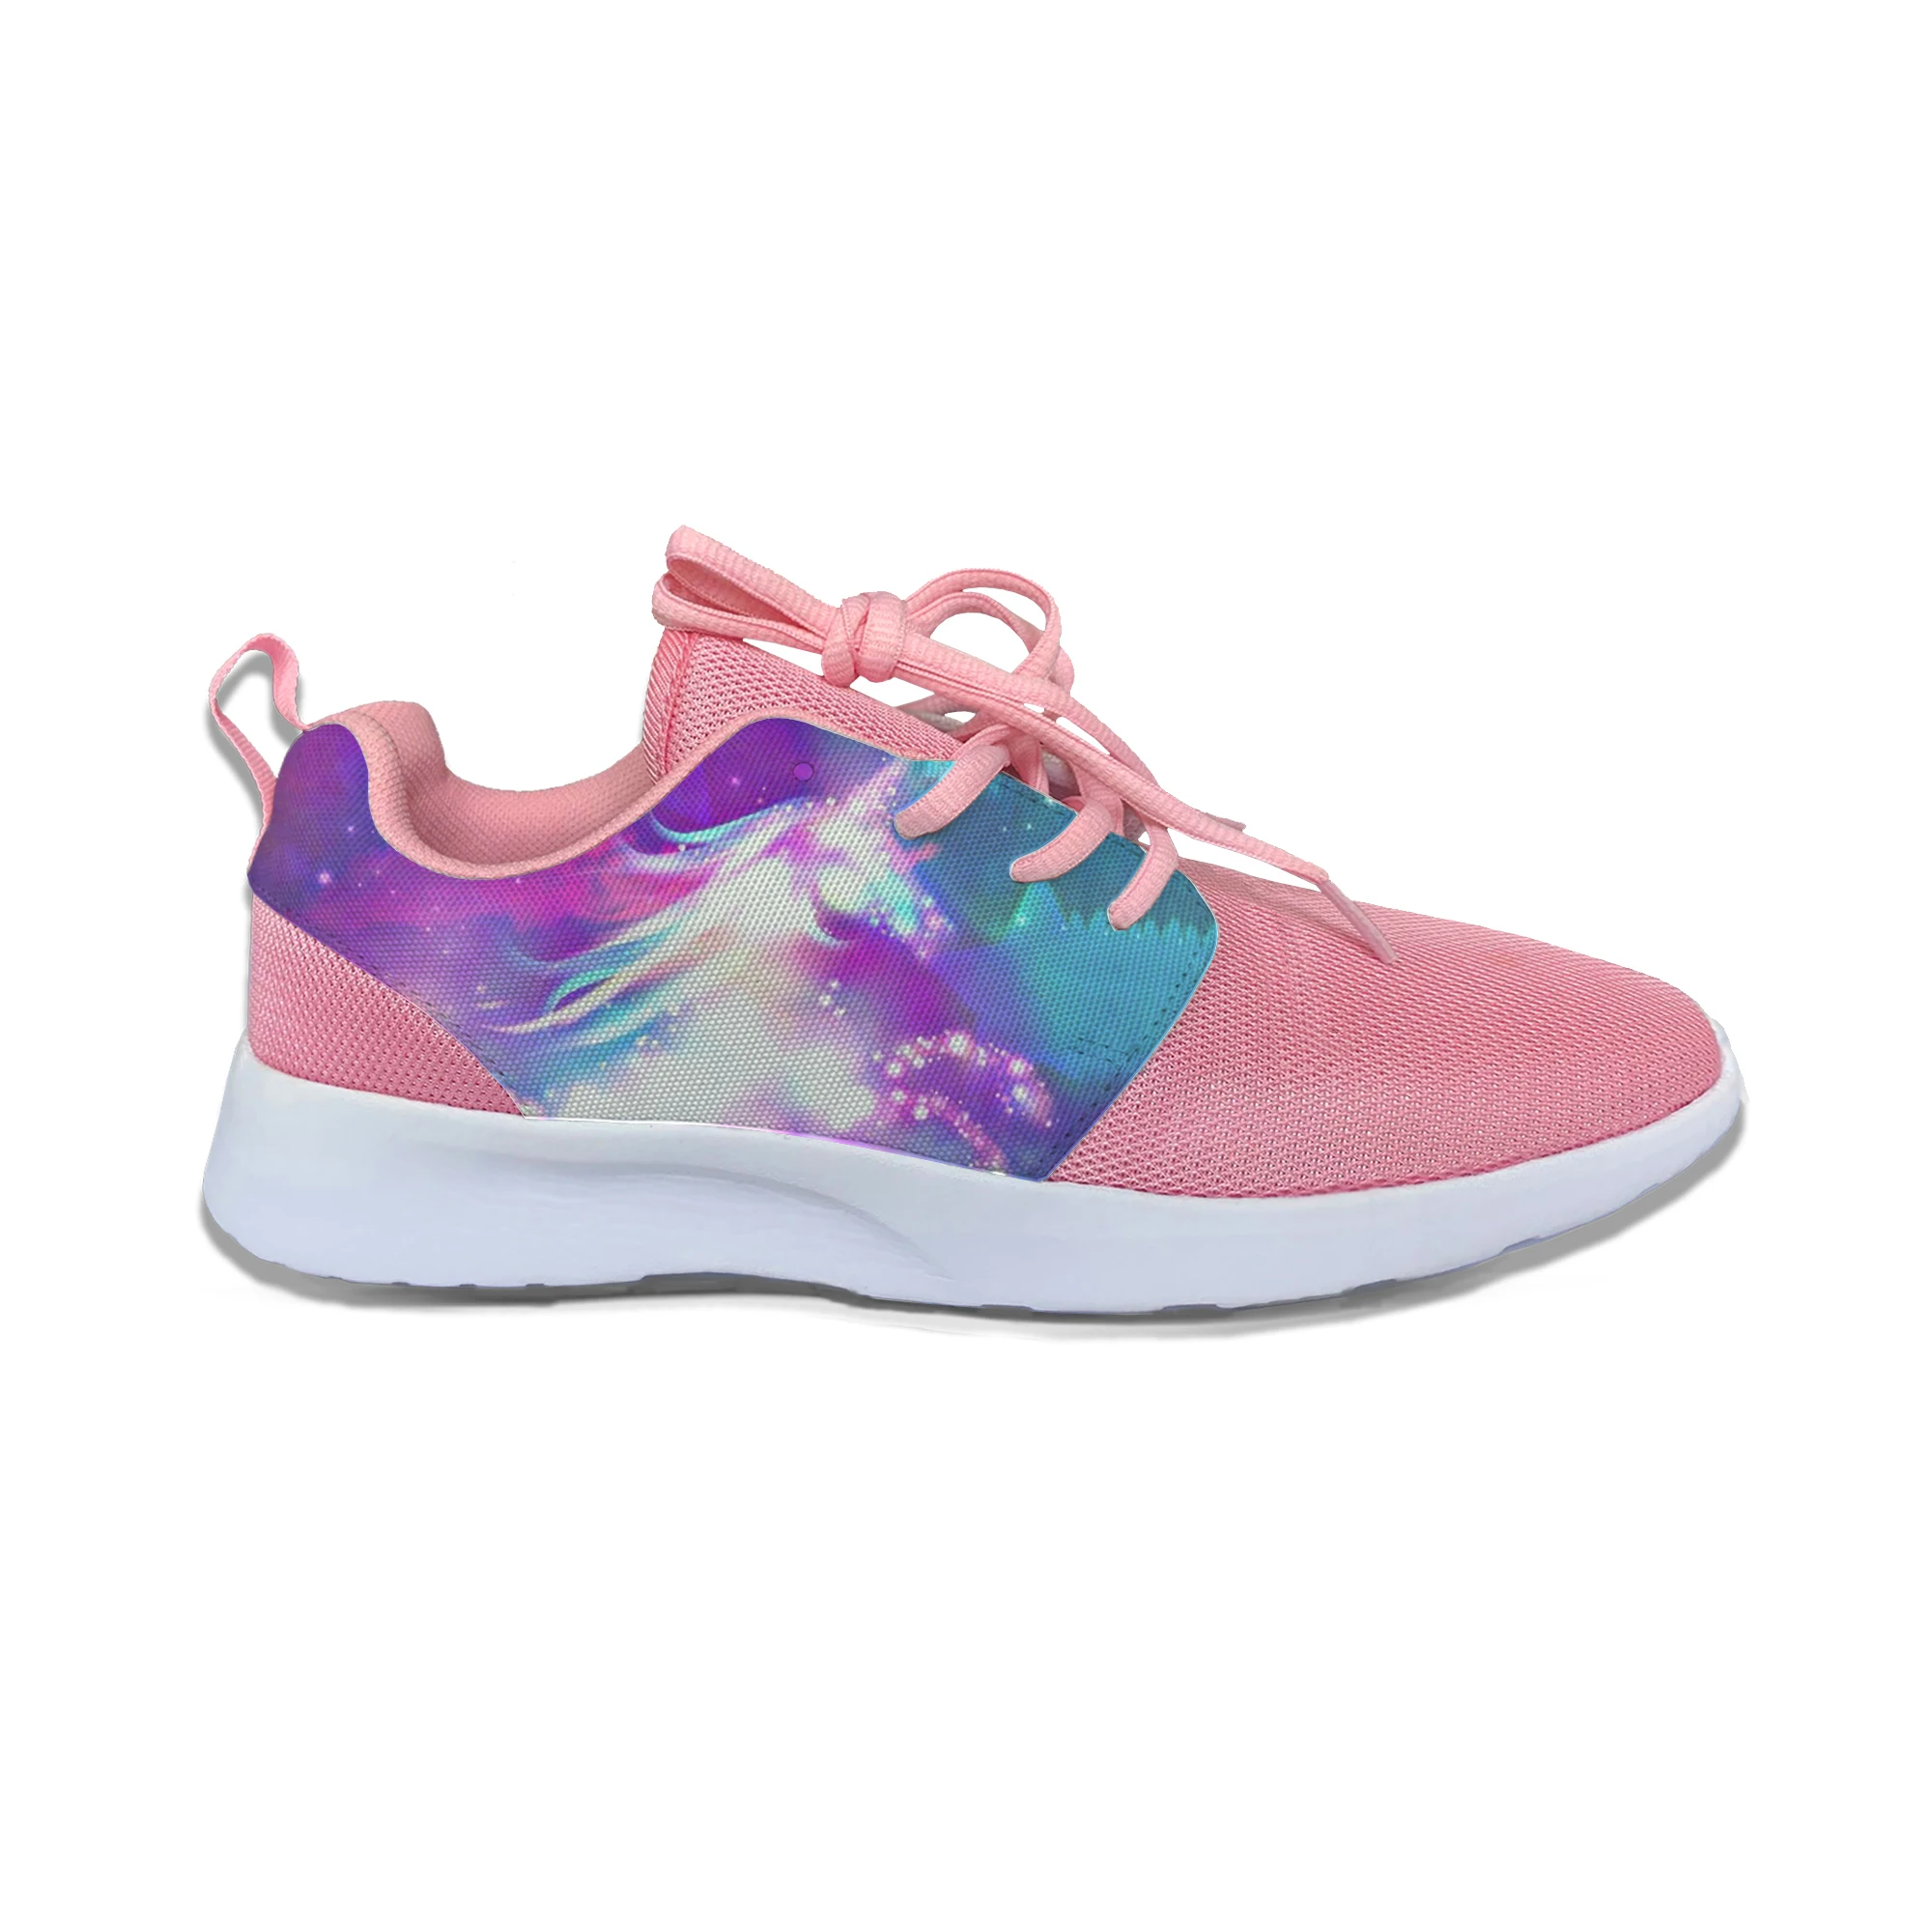 

Unicorn Galaxy Anime Hot Cute Vogue Funny Sport Running Shoes Casual Breathable Lightweight 3D Print Lady Women Female Sneakers